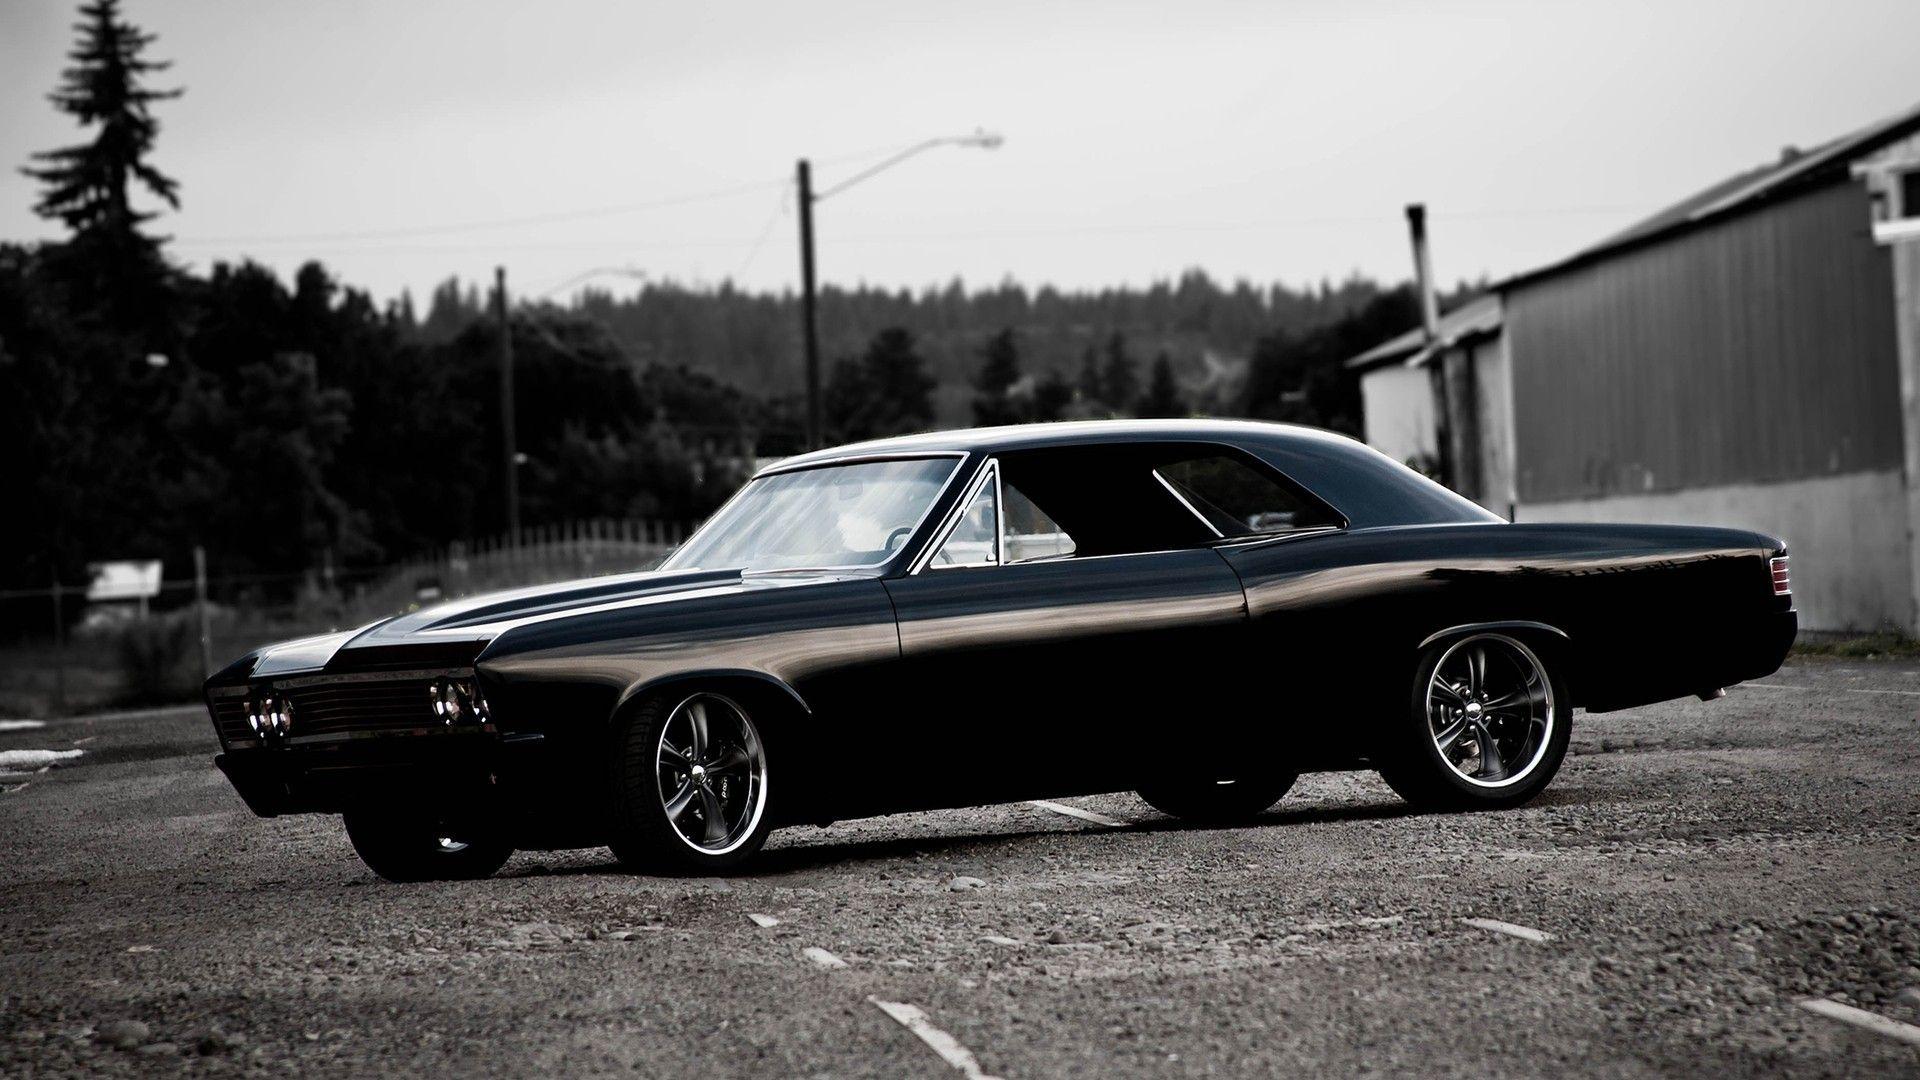 Chevelle SS Wallpapers 1920x1080